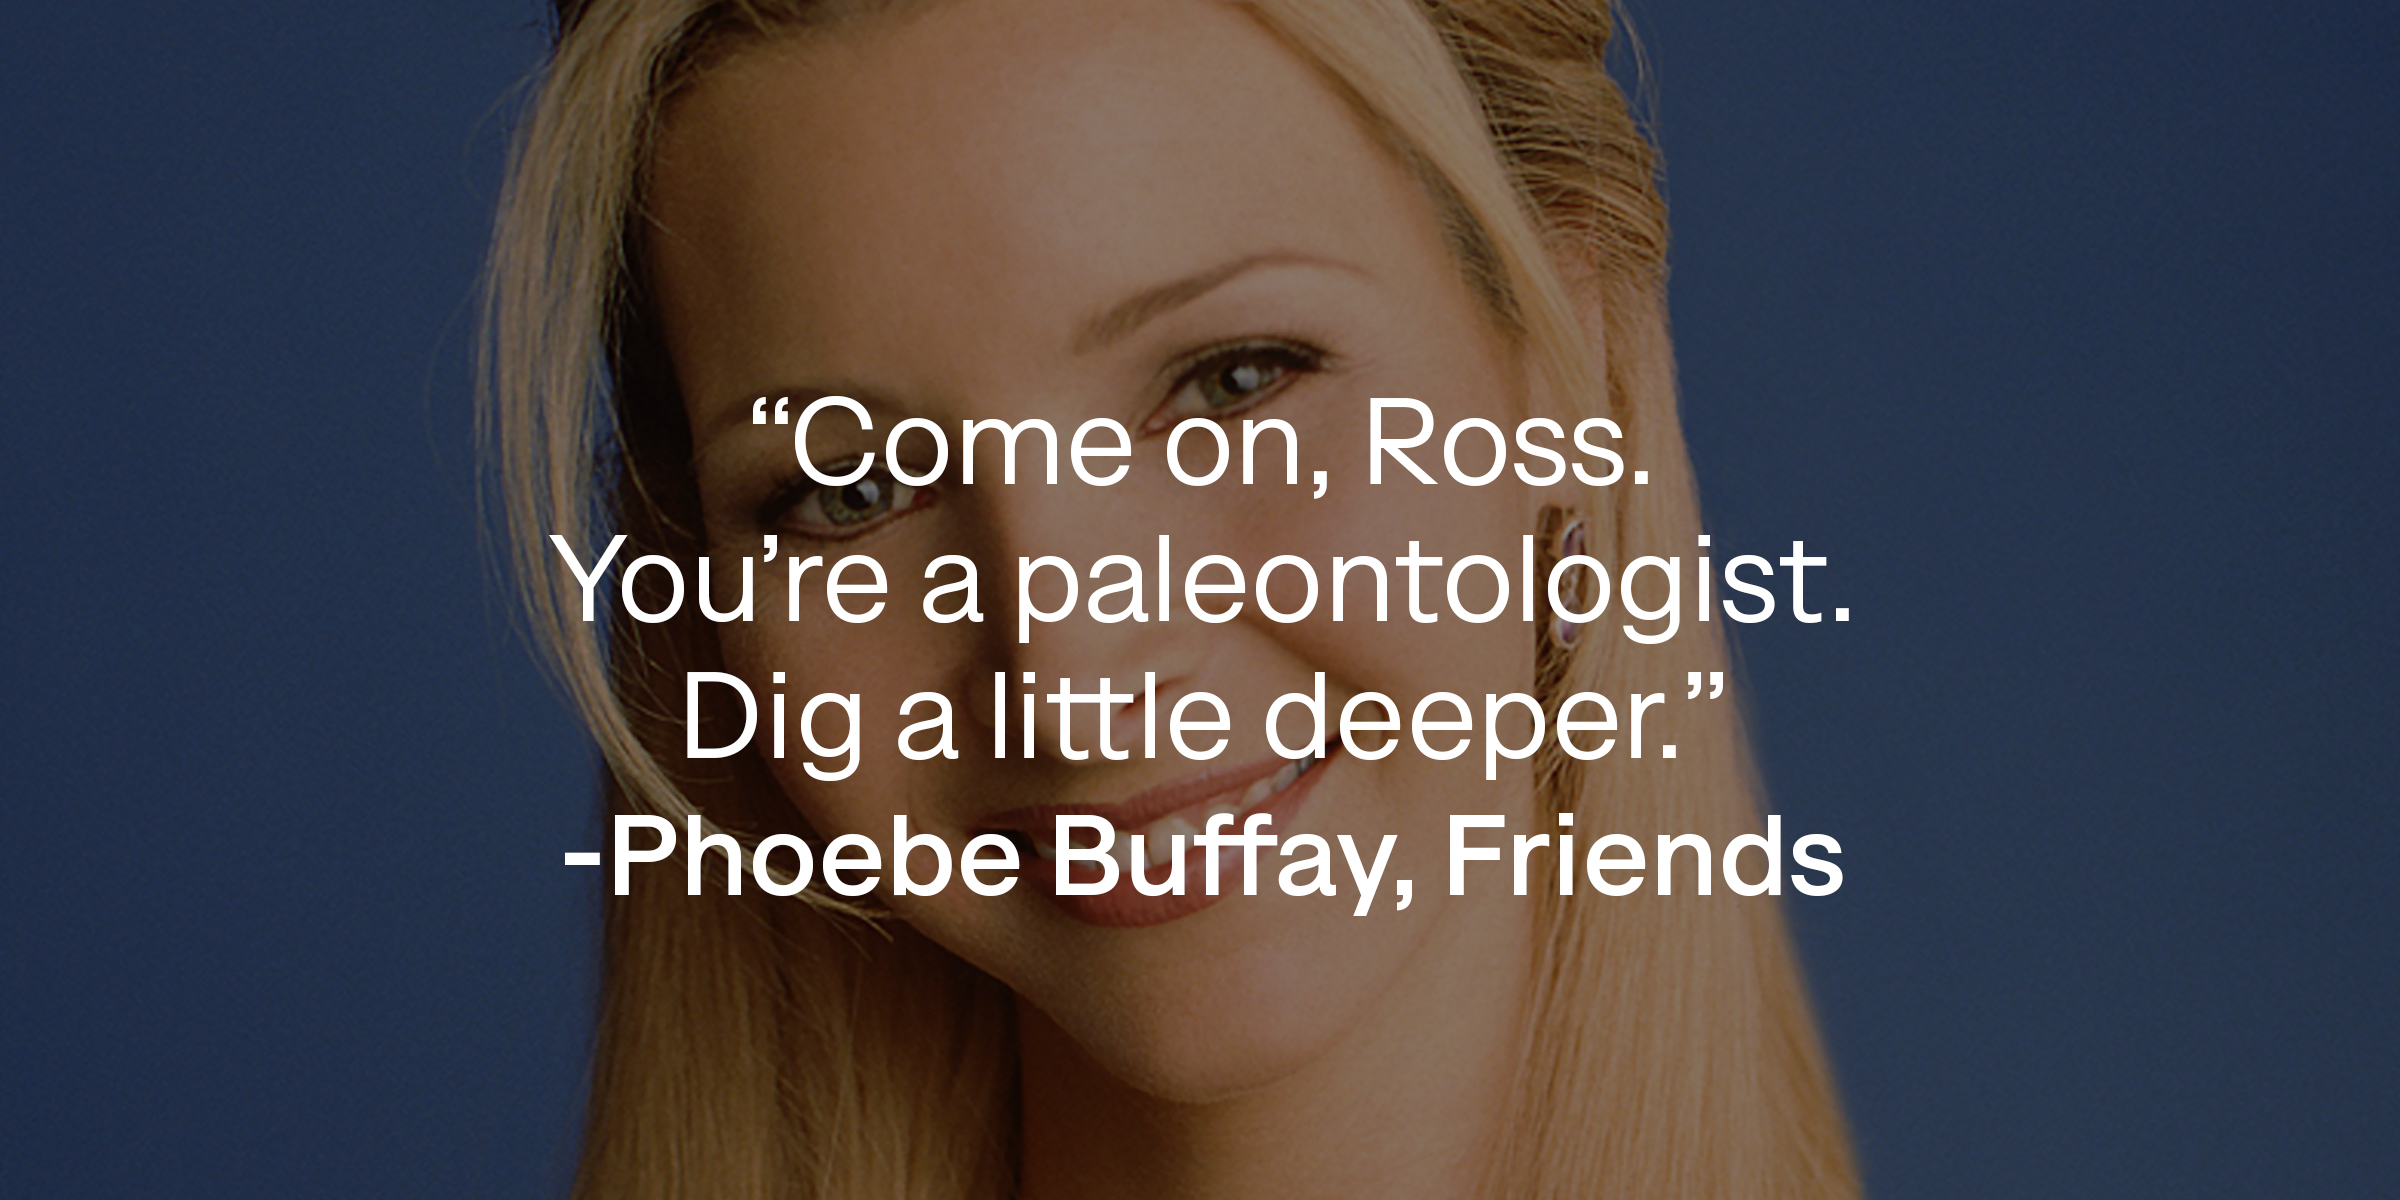 A photo of Phoebe Buffay with her quote: "Come on, Ross. You're a paleontologist. Dig a little deeper." | Source: Facebook.com/friends.tv